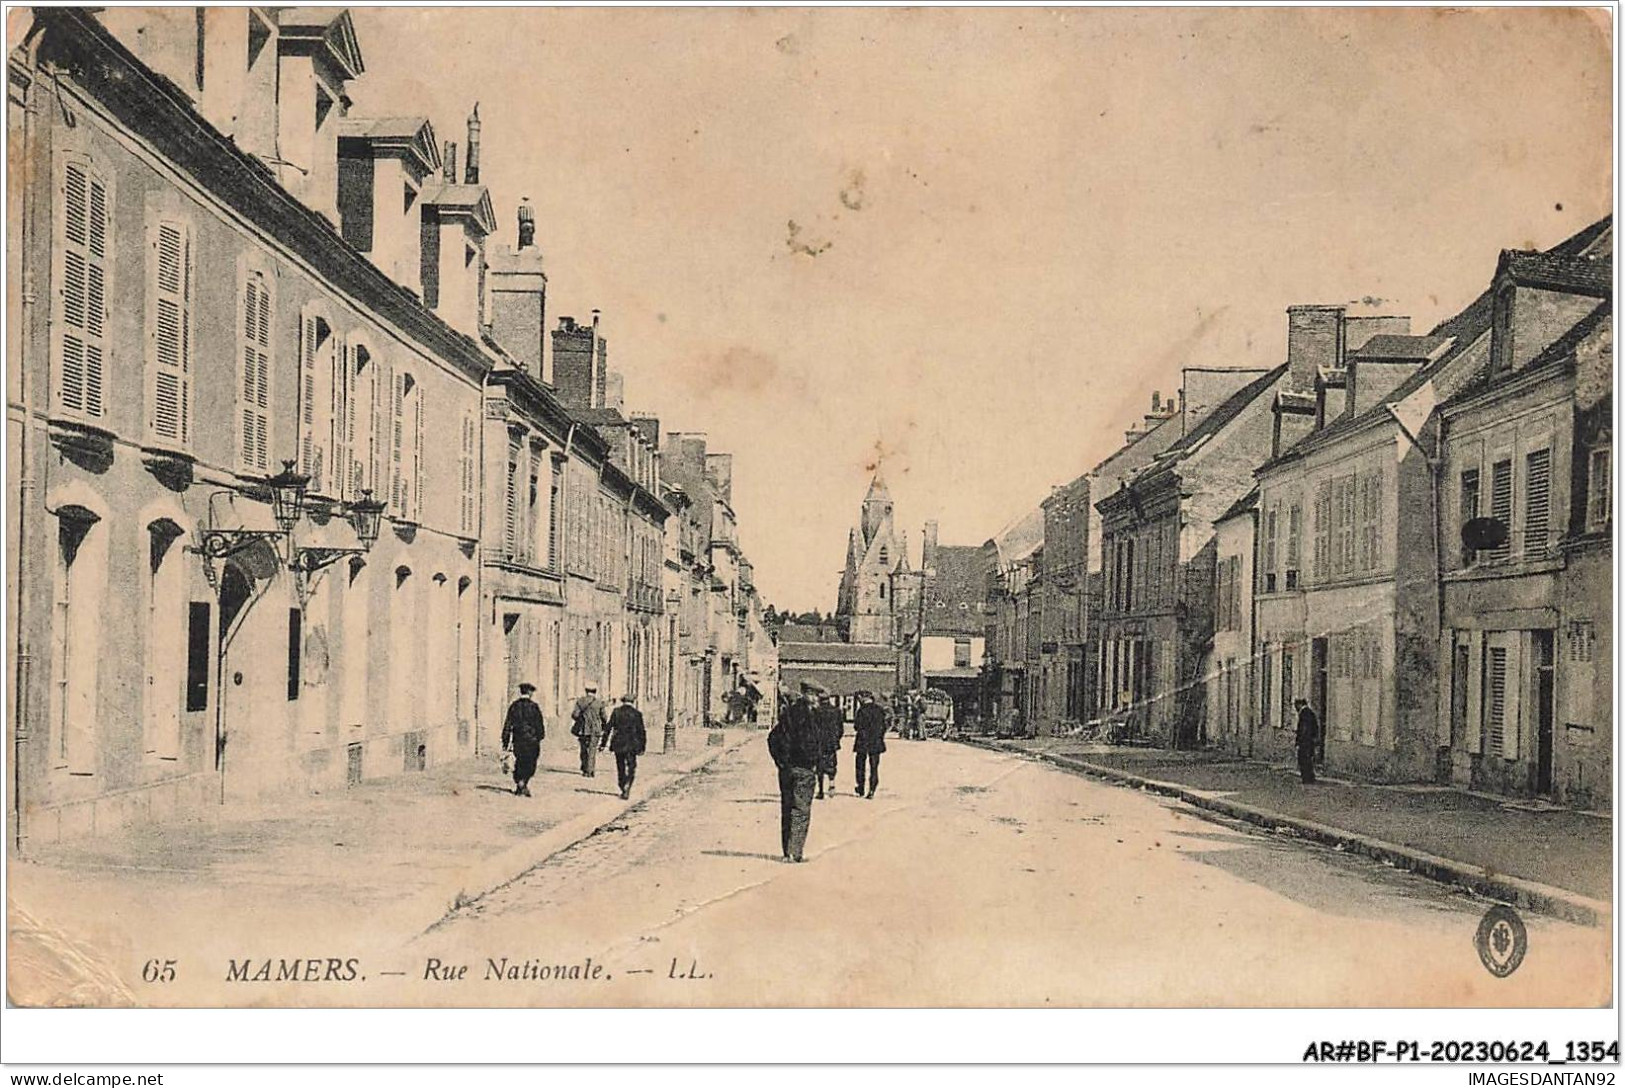 AR#BFP1-72-0678 - MAMERS - Rue Nationale - Mamers